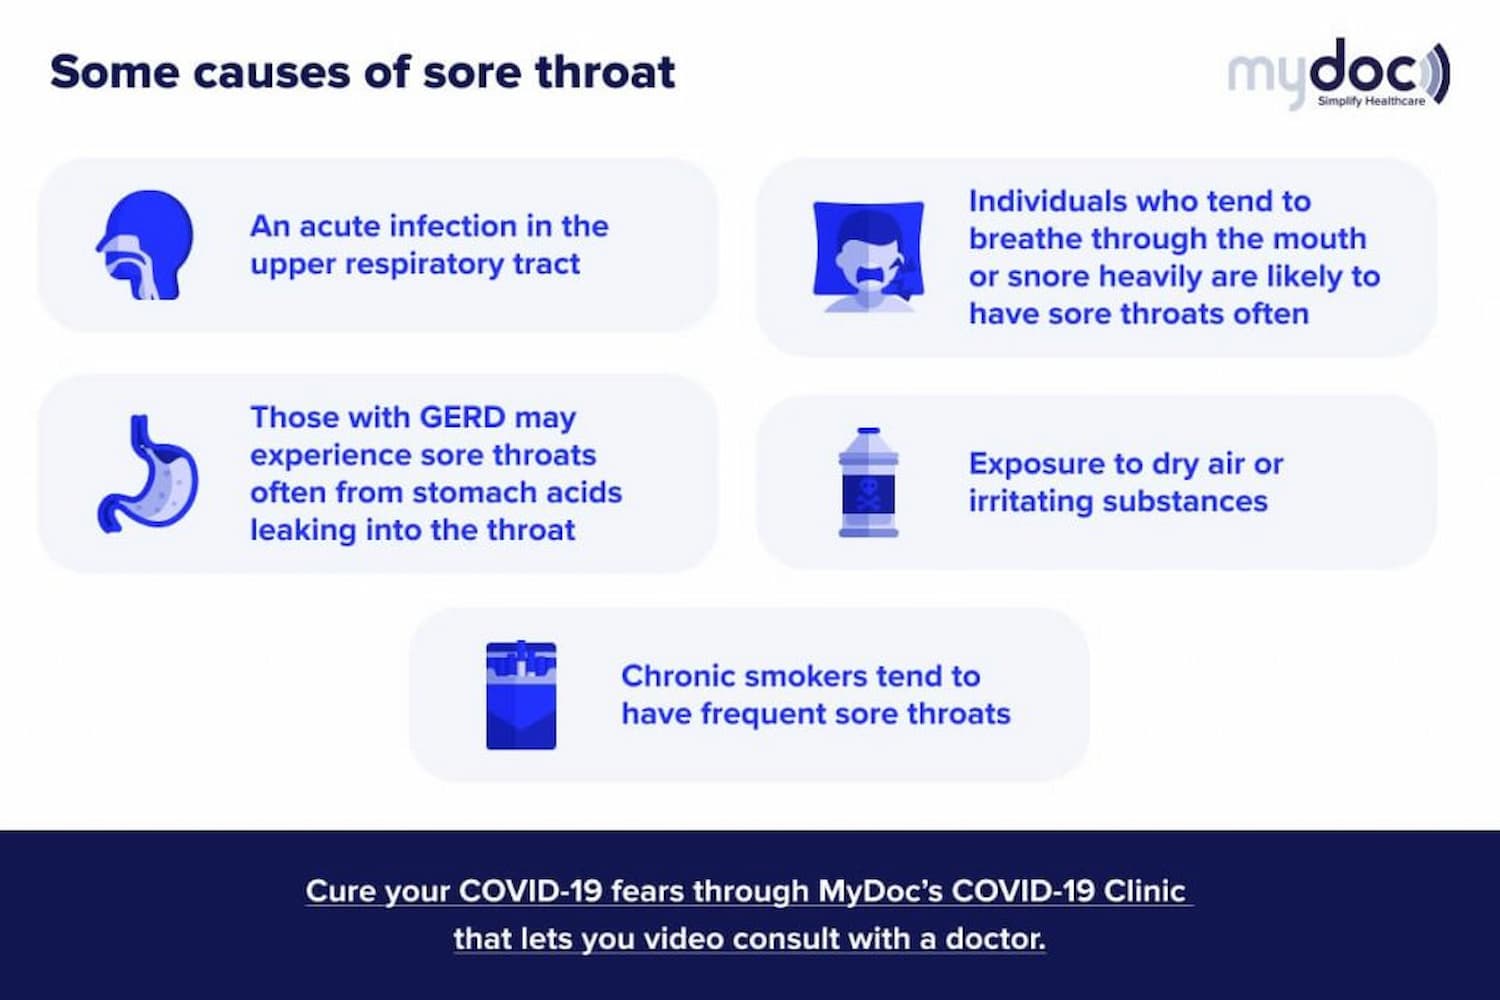 The primary causes of a sore throat